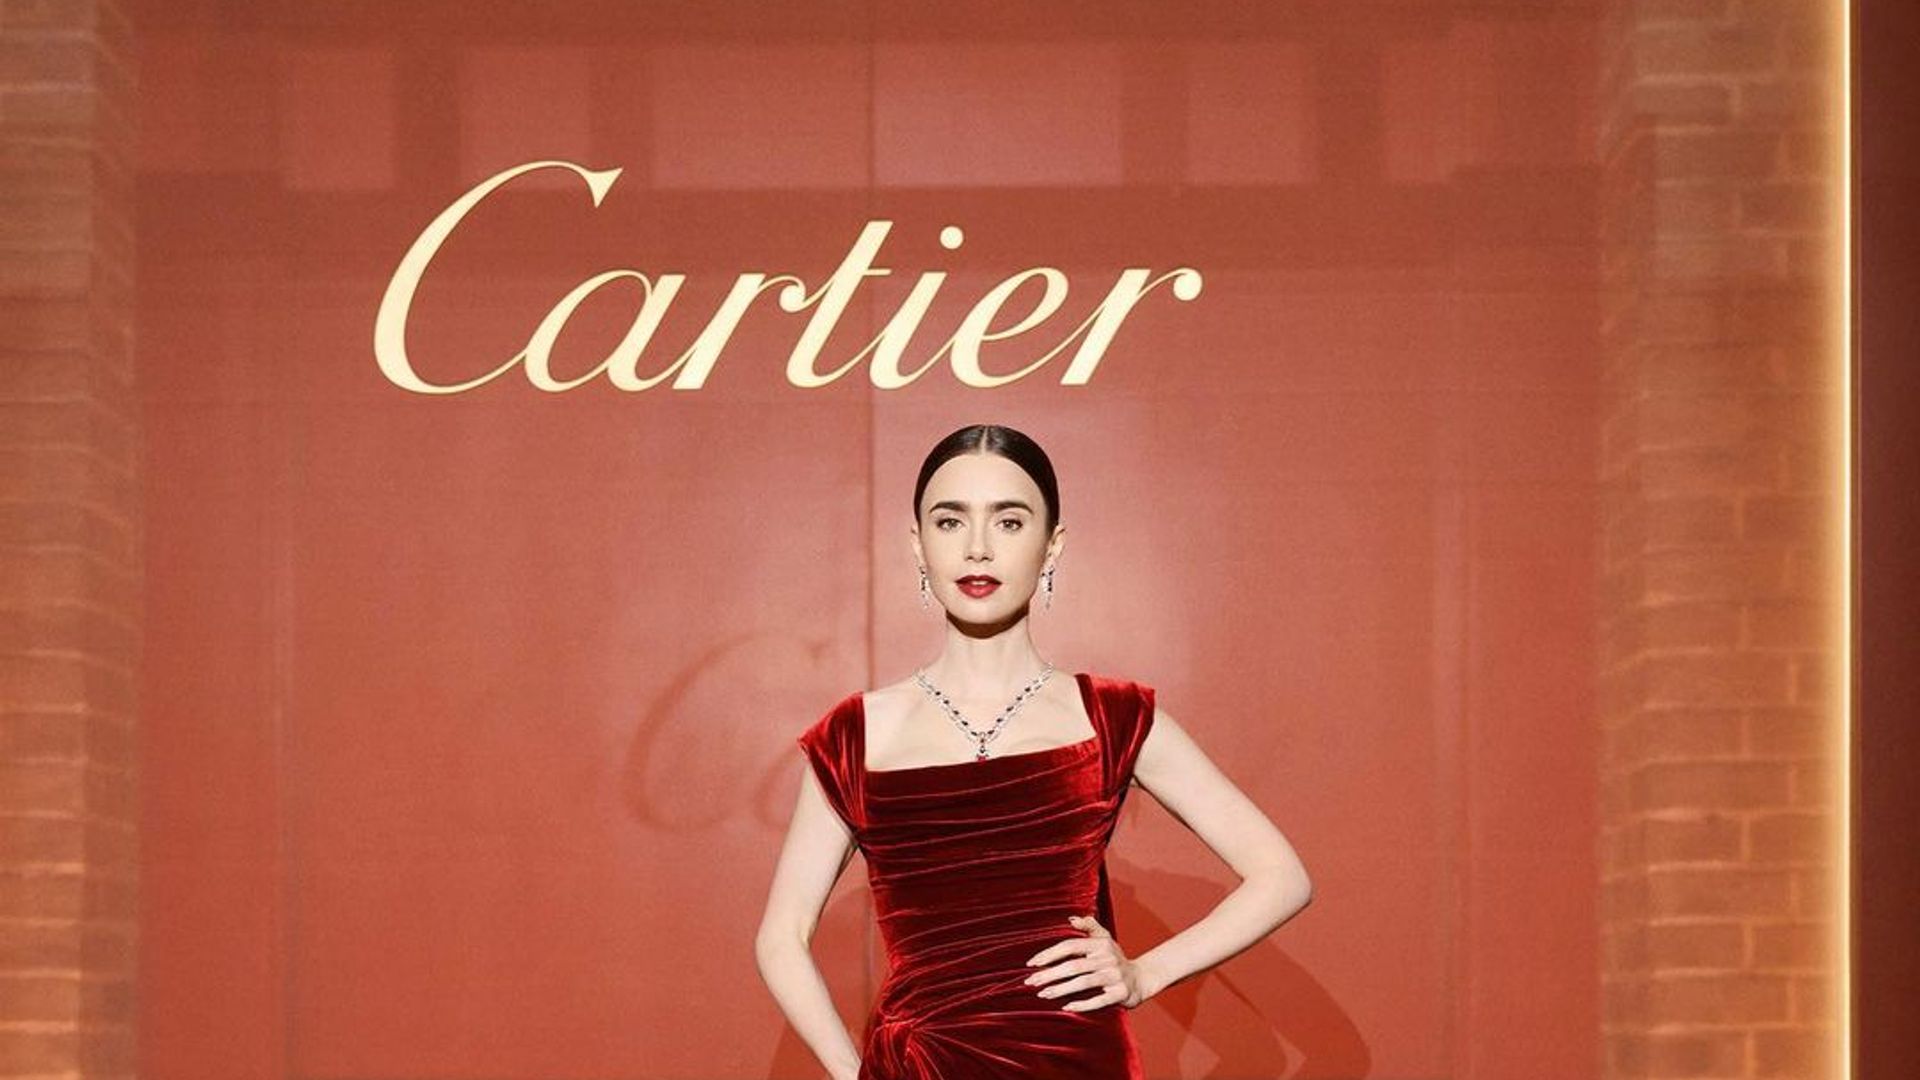 Lily wore a red velvet Elie Saab haute couture gown to Cartier's Beijing event